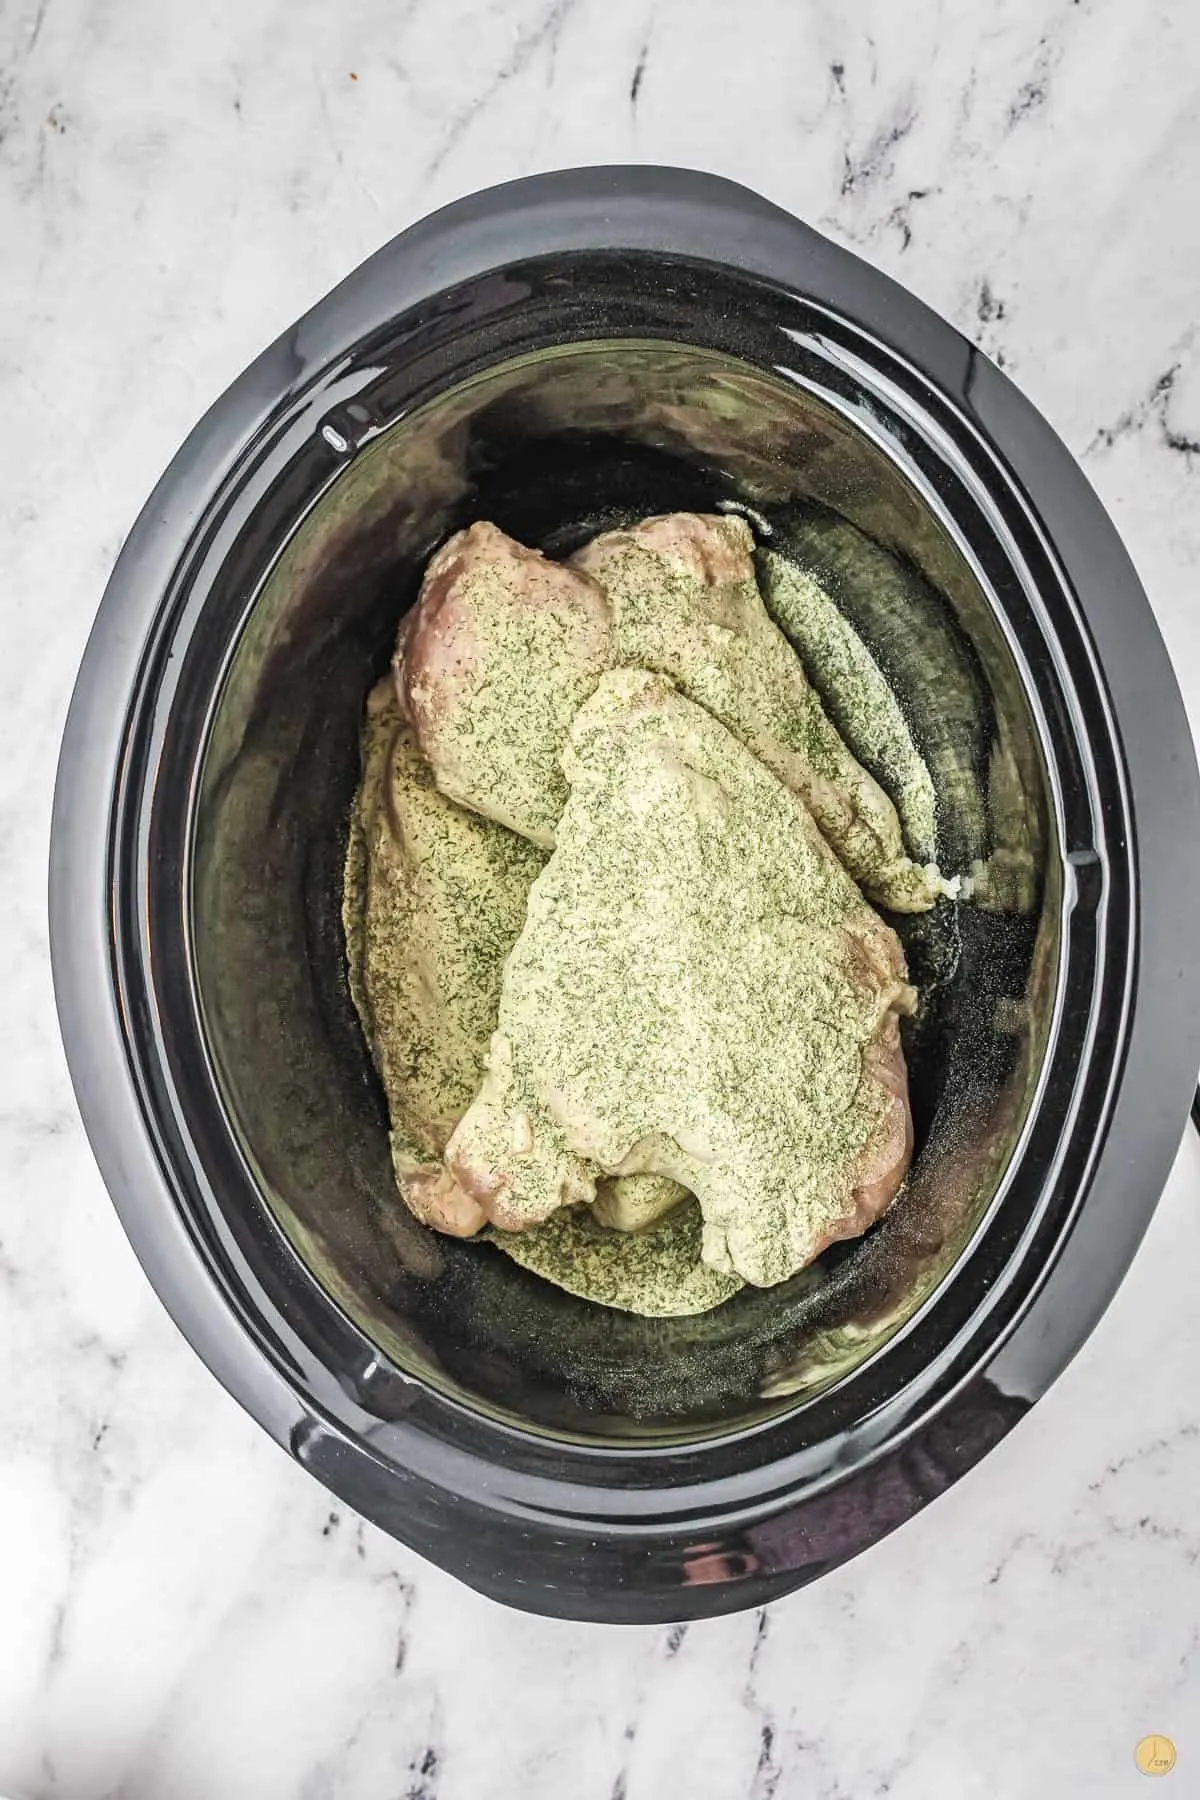 chicken and ranch seasoning in a crock pot